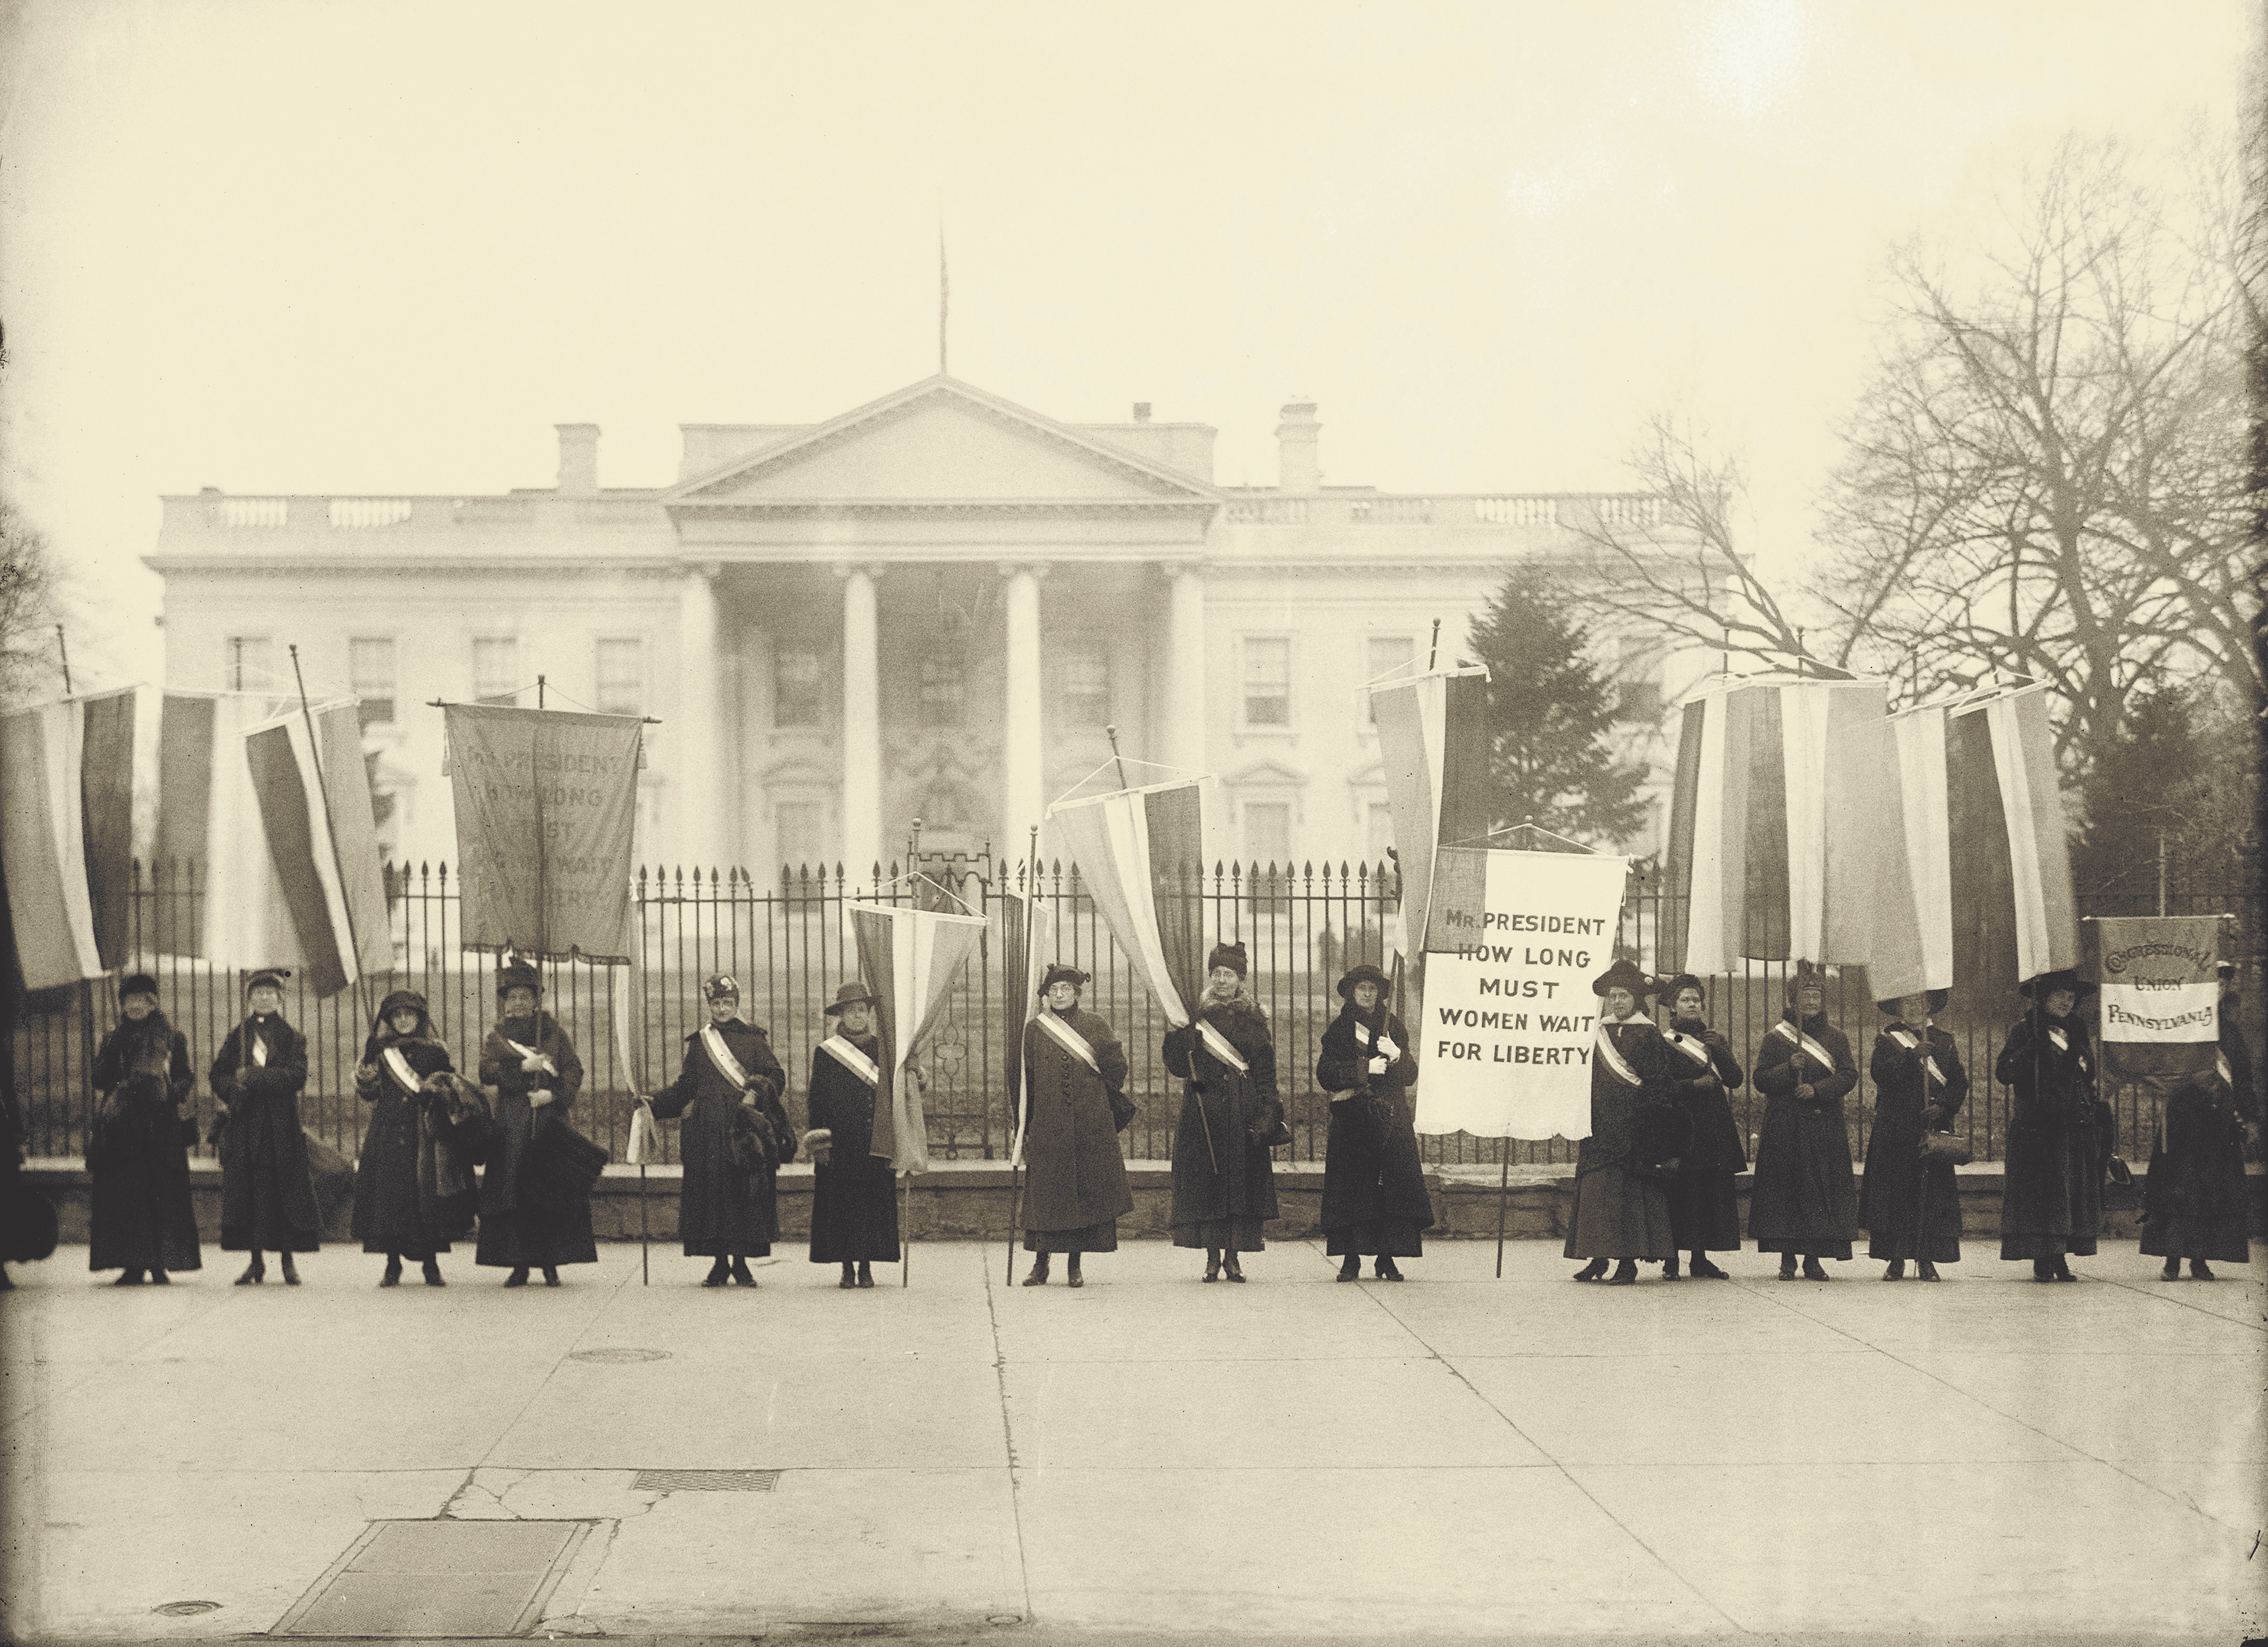 Women Suffrage Pickets at the White House, 1917. Harris & Ewing Photograph Collection, Library of Congress.